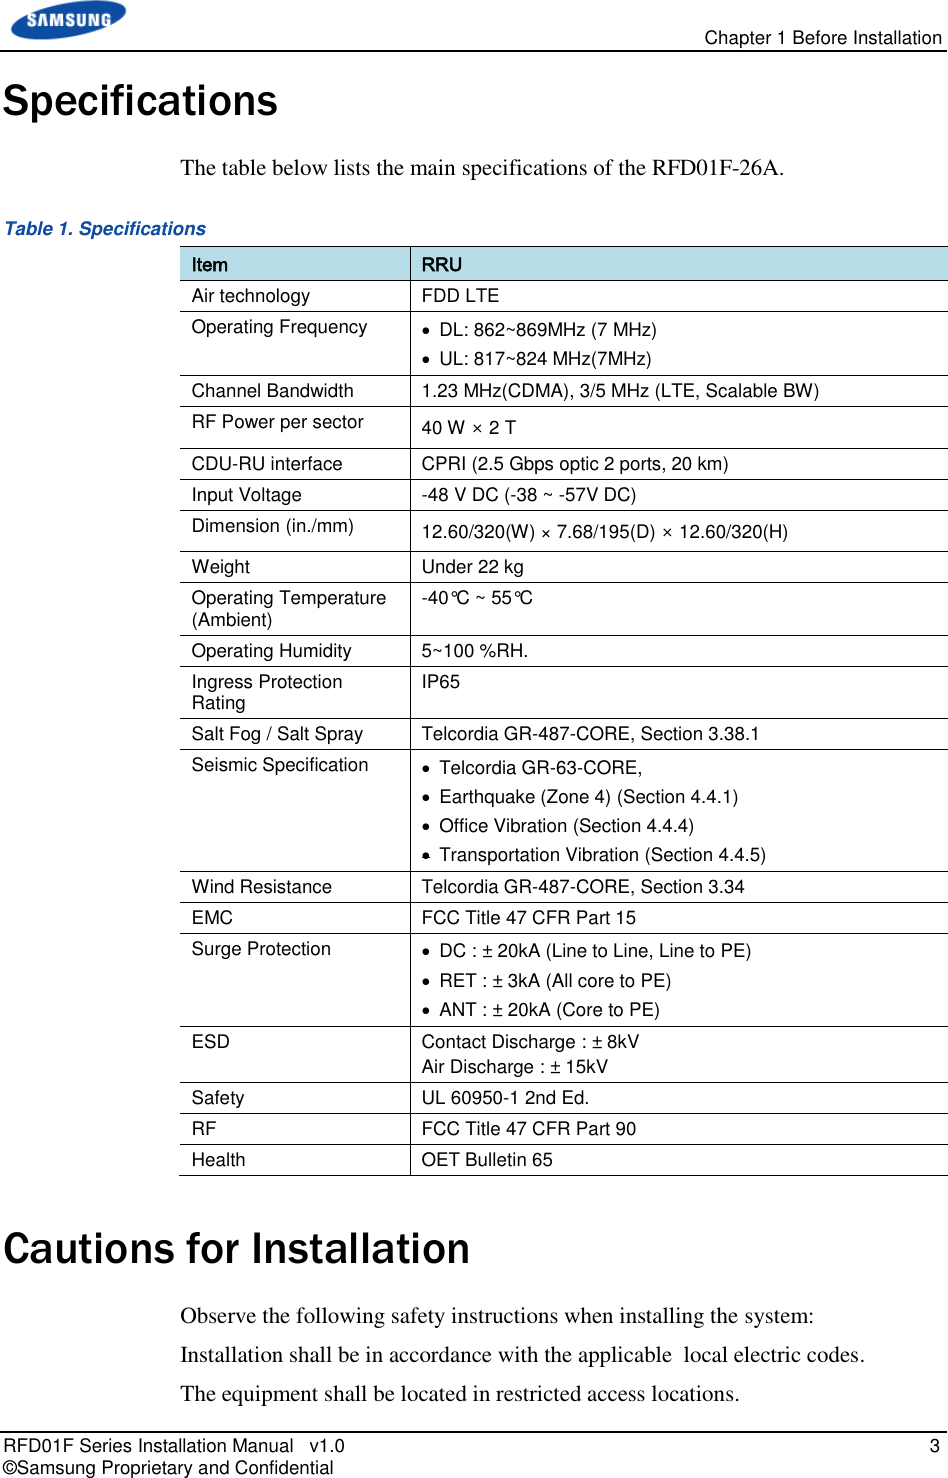  Chapter 1 Before Installation RFD01F Series Installation Manual   v1.0    3 © Samsung Proprietary and Confidential Specifications The table below lists the main specifications of the RFD01F-26A. Table 1. Specifications Item RRU Air technology FDD LTE Operating Frequency   DL: 862~869MHz (7 MHz)   UL: 817~824 MHz(7MHz) Channel Bandwidth 1.23 MHz(CDMA), 3/5 MHz (LTE, Scalable BW) RF Power per sector 40 W × 2 T CDU-RU interface CPRI (2.5 Gbps optic 2 ports, 20 km) Input Voltage -48 V DC (-38 ~ -57V DC) Dimension (in./mm) 12.60/320(W) × 7.68/195(D) × 12.60/320(H) Weight Under 22 kg Operating Temperature (Ambient) -40°C ~ 55°C Operating Humidity 5~100 %RH. Ingress Protection Rating IP65 Salt Fog / Salt Spray Telcordia GR-487-CORE, Section 3.38.1 Seismic Specification   Telcordia GR-63-CORE,    Earthquake (Zone 4) (Section 4.4.1)   Office Vibration (Section 4.4.4)   Transportation Vibration (Section 4.4.5) Wind Resistance Telcordia GR-487-CORE, Section 3.34 EMC FCC Title 47 CFR Part 15 Surge Protection   DC : ± 20kA (Line to Line, Line to PE)   RET : ± 3kA (All core to PE)   ANT : ± 20kA (Core to PE) ESD Contact Discharge : ± 8kV Air Discharge : ± 15kV Safety UL 60950-1 2nd Ed. RF  FCC Title 47 CFR Part 90 Health OET Bulletin 65 Cautions for Installation Observe the following safety instructions when installing the system: Installation shall be in accordance with the applicable  local electric codes. The equipment shall be located in restricted access locations. 